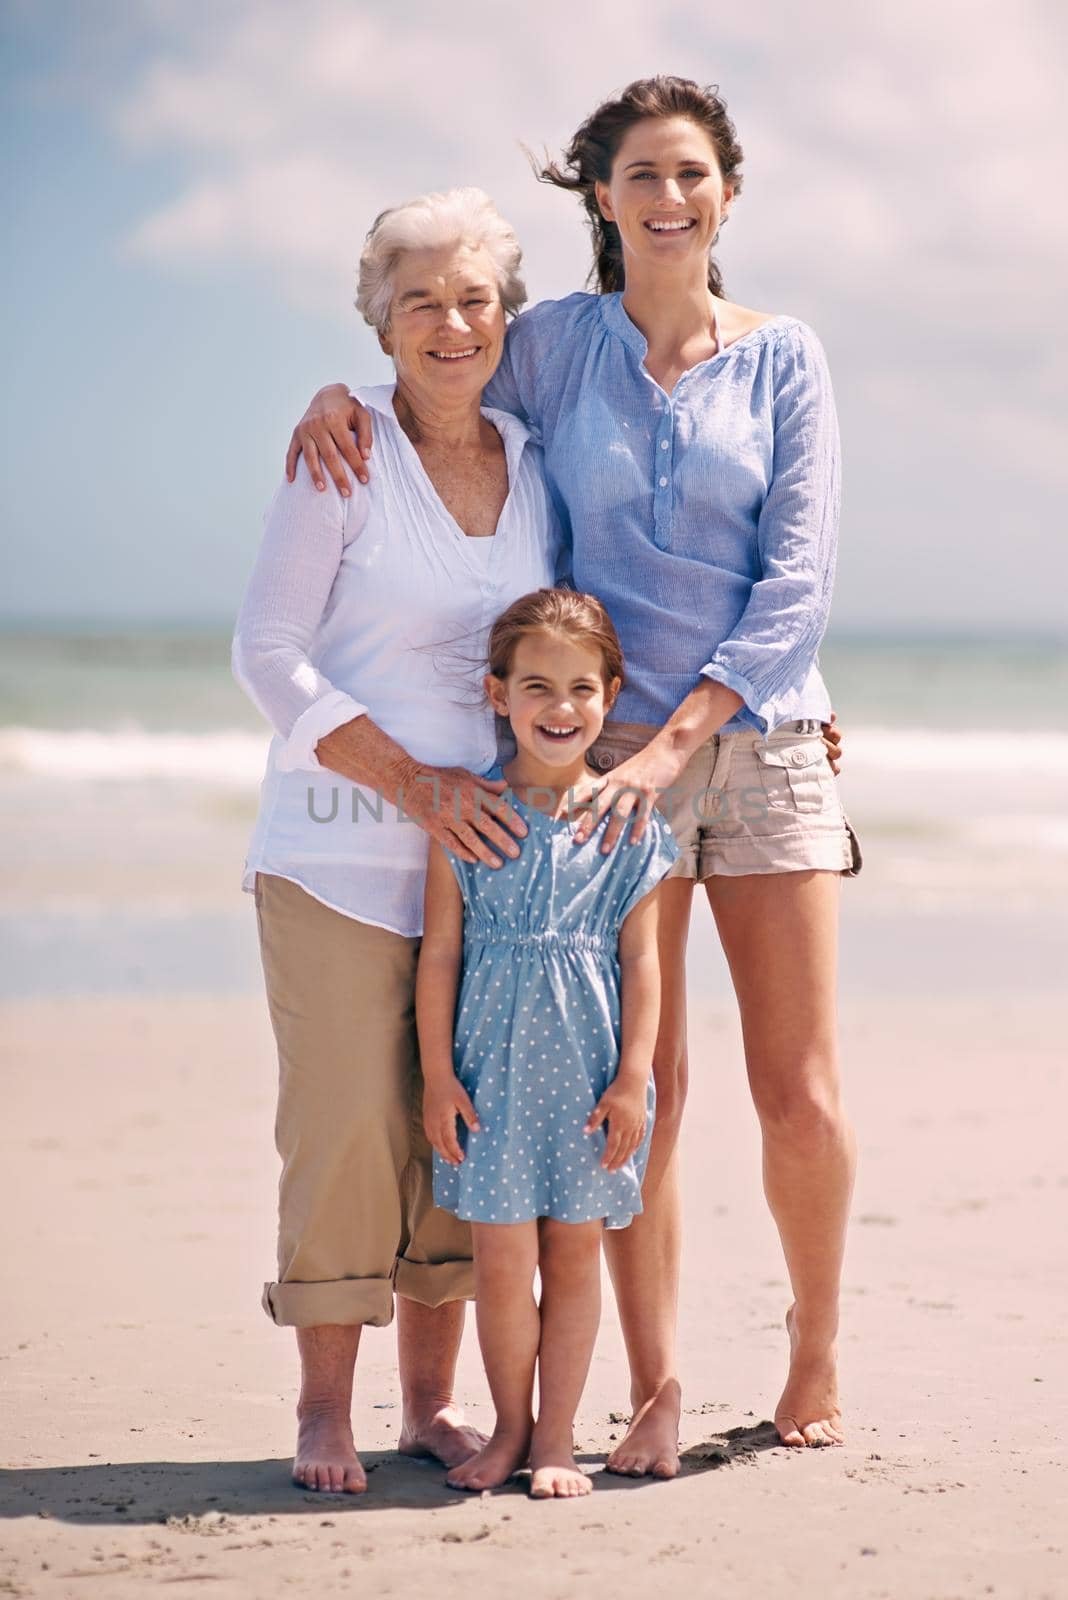 The ladies in my life. Portrait of a woman with her daughter and mother at the beach. by YuriArcurs